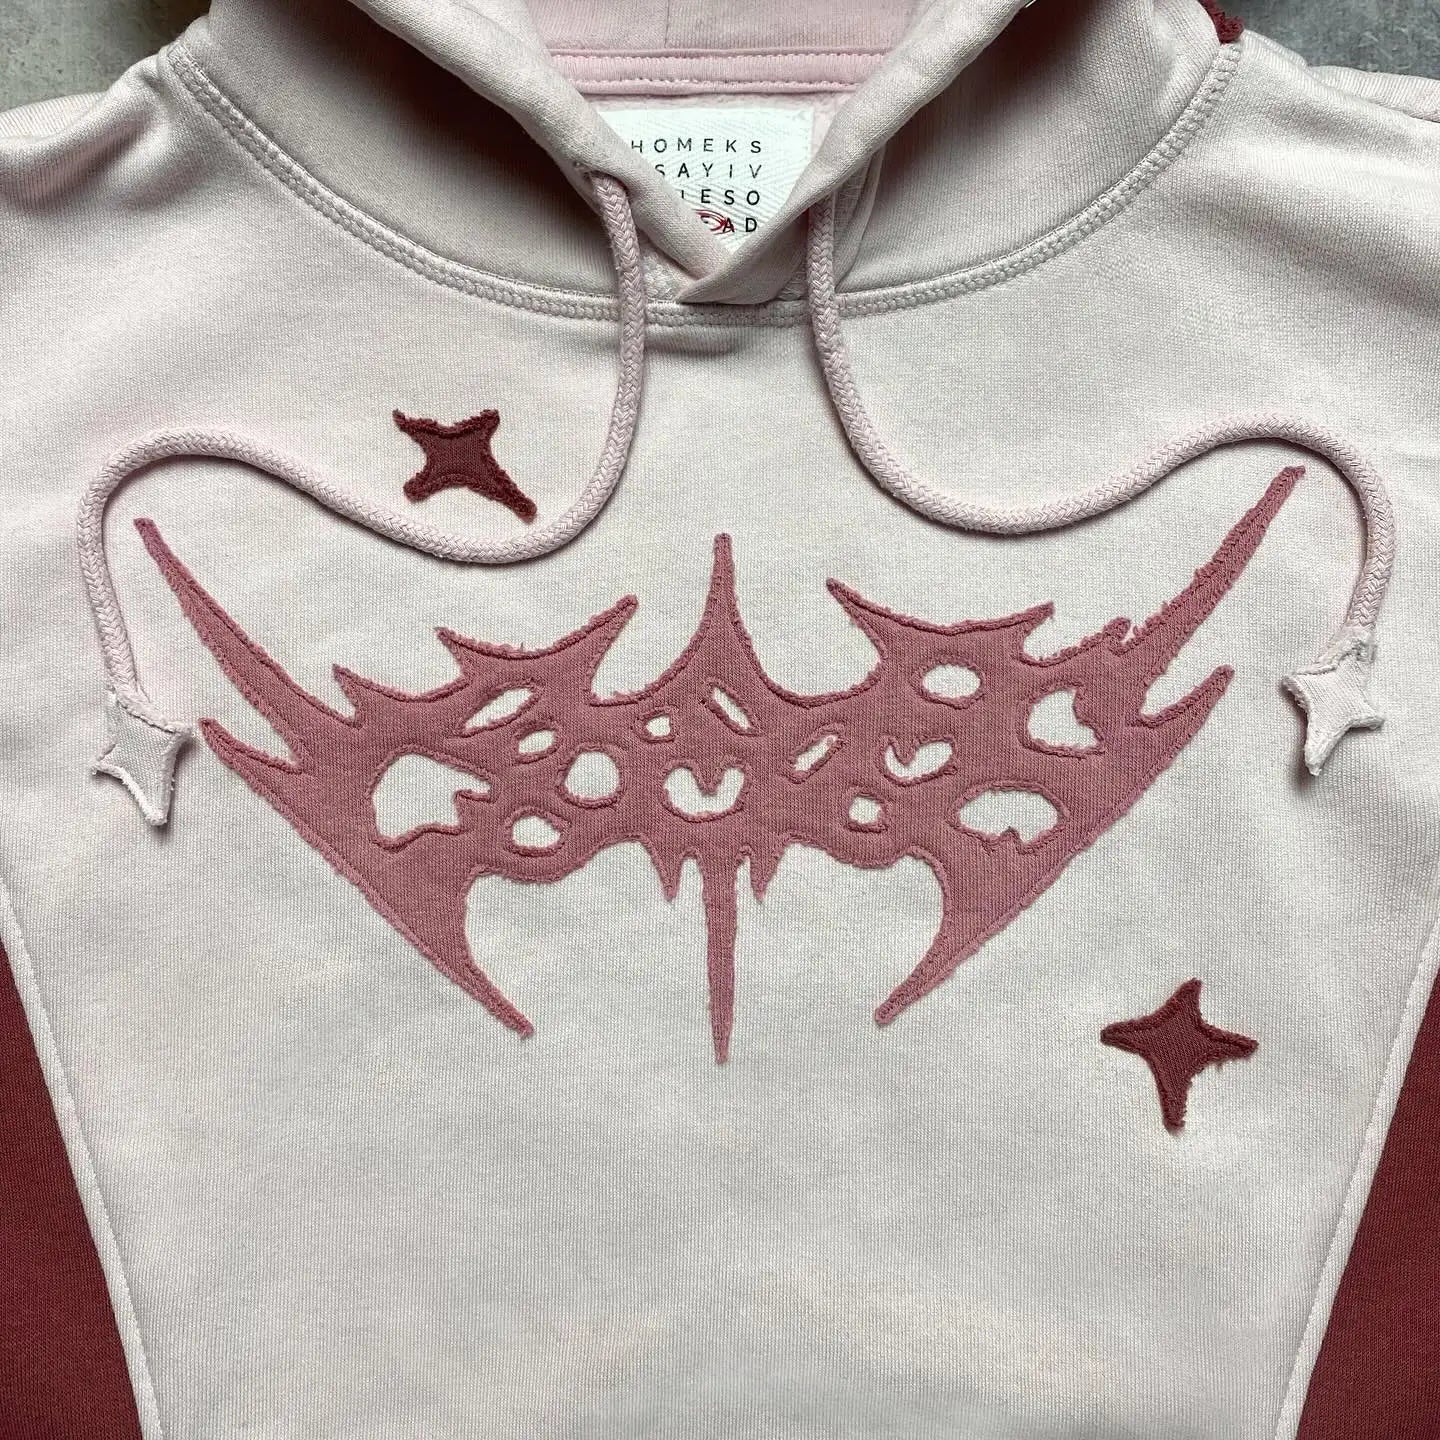 Japanese Astro Embroidery Hoodie